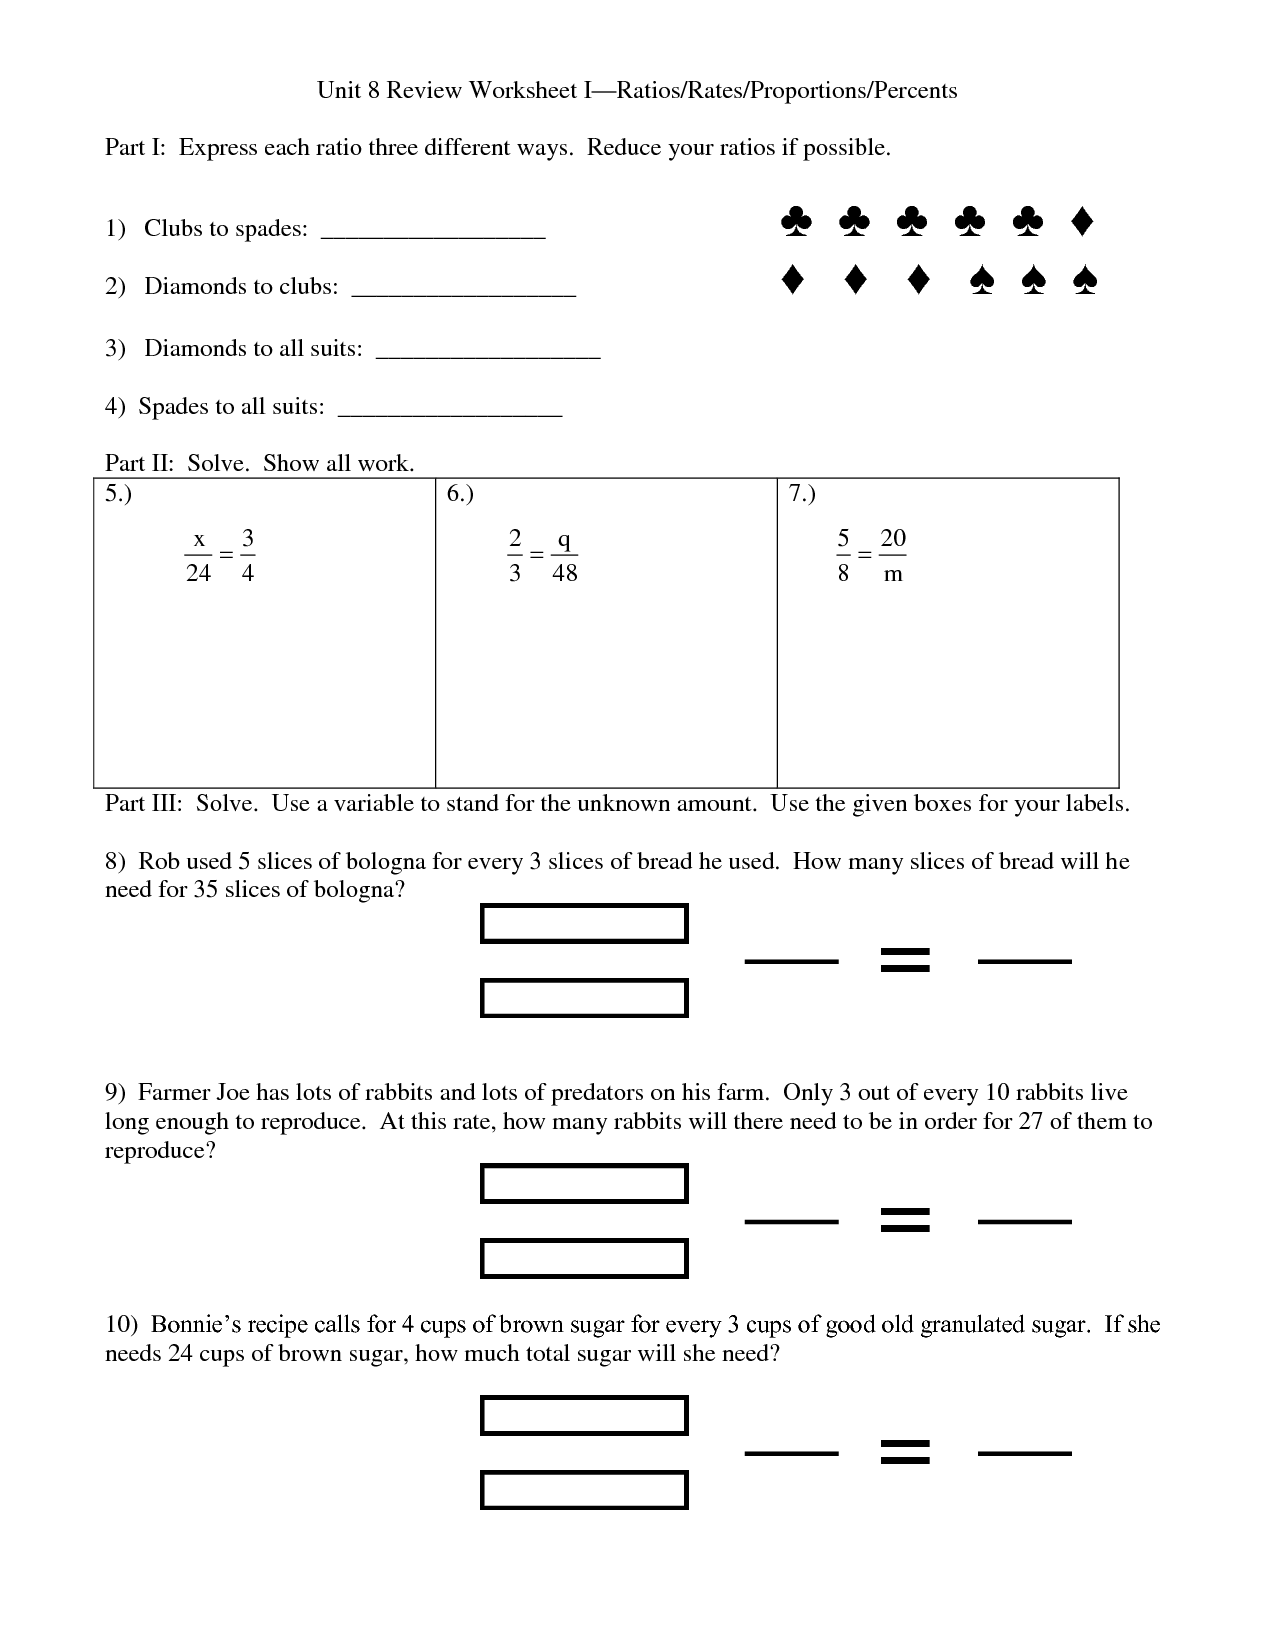 7-best-images-of-ratios-and-proportions-worksheets-7th-grade-equivalent-ratios-worksheets